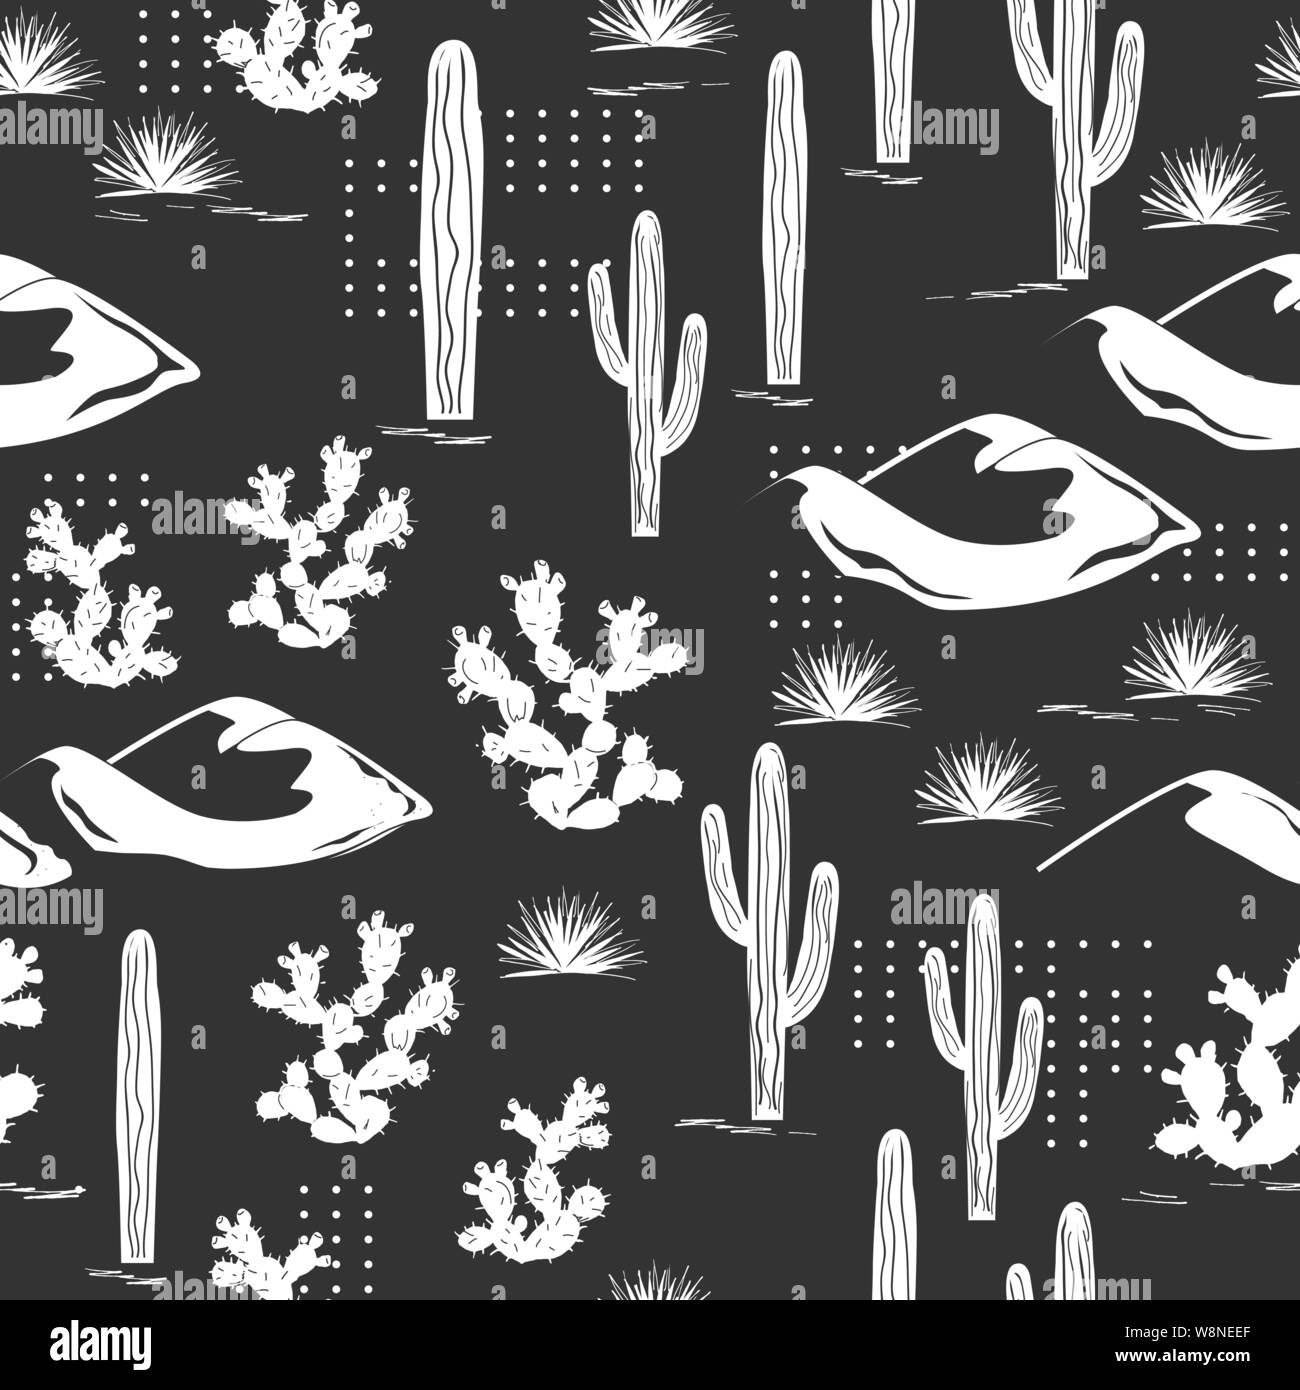 Vector graphic seamless pattern with desert dunes, saguaro cactuses, prickly pear, and dots. Stylish adventure background for teens, cards, textile or Stock Vector